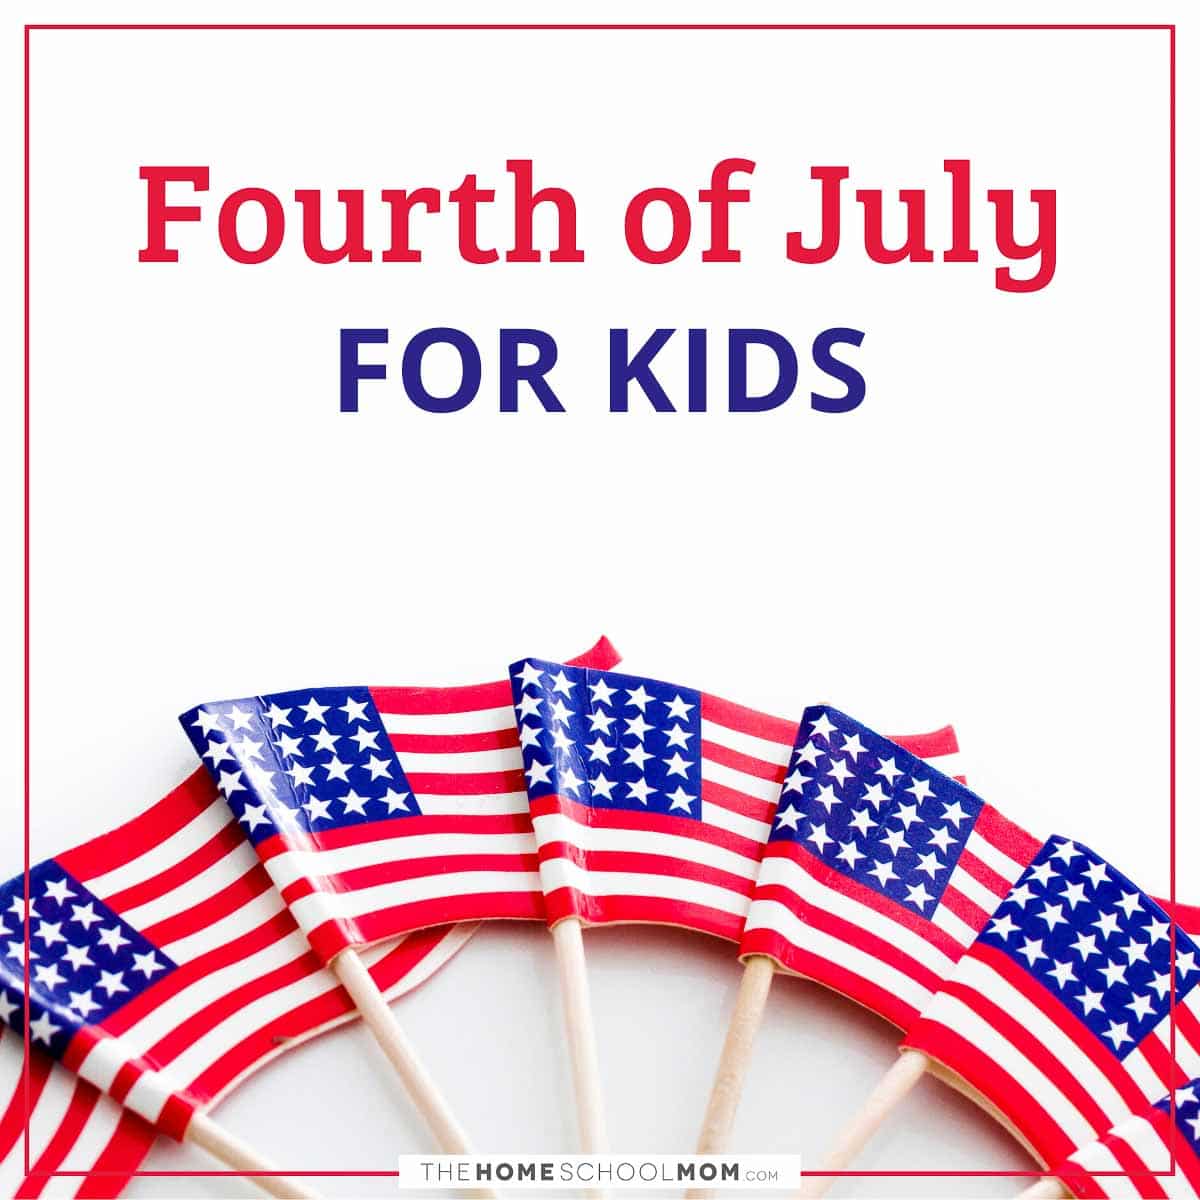 Fourth of July for kids.